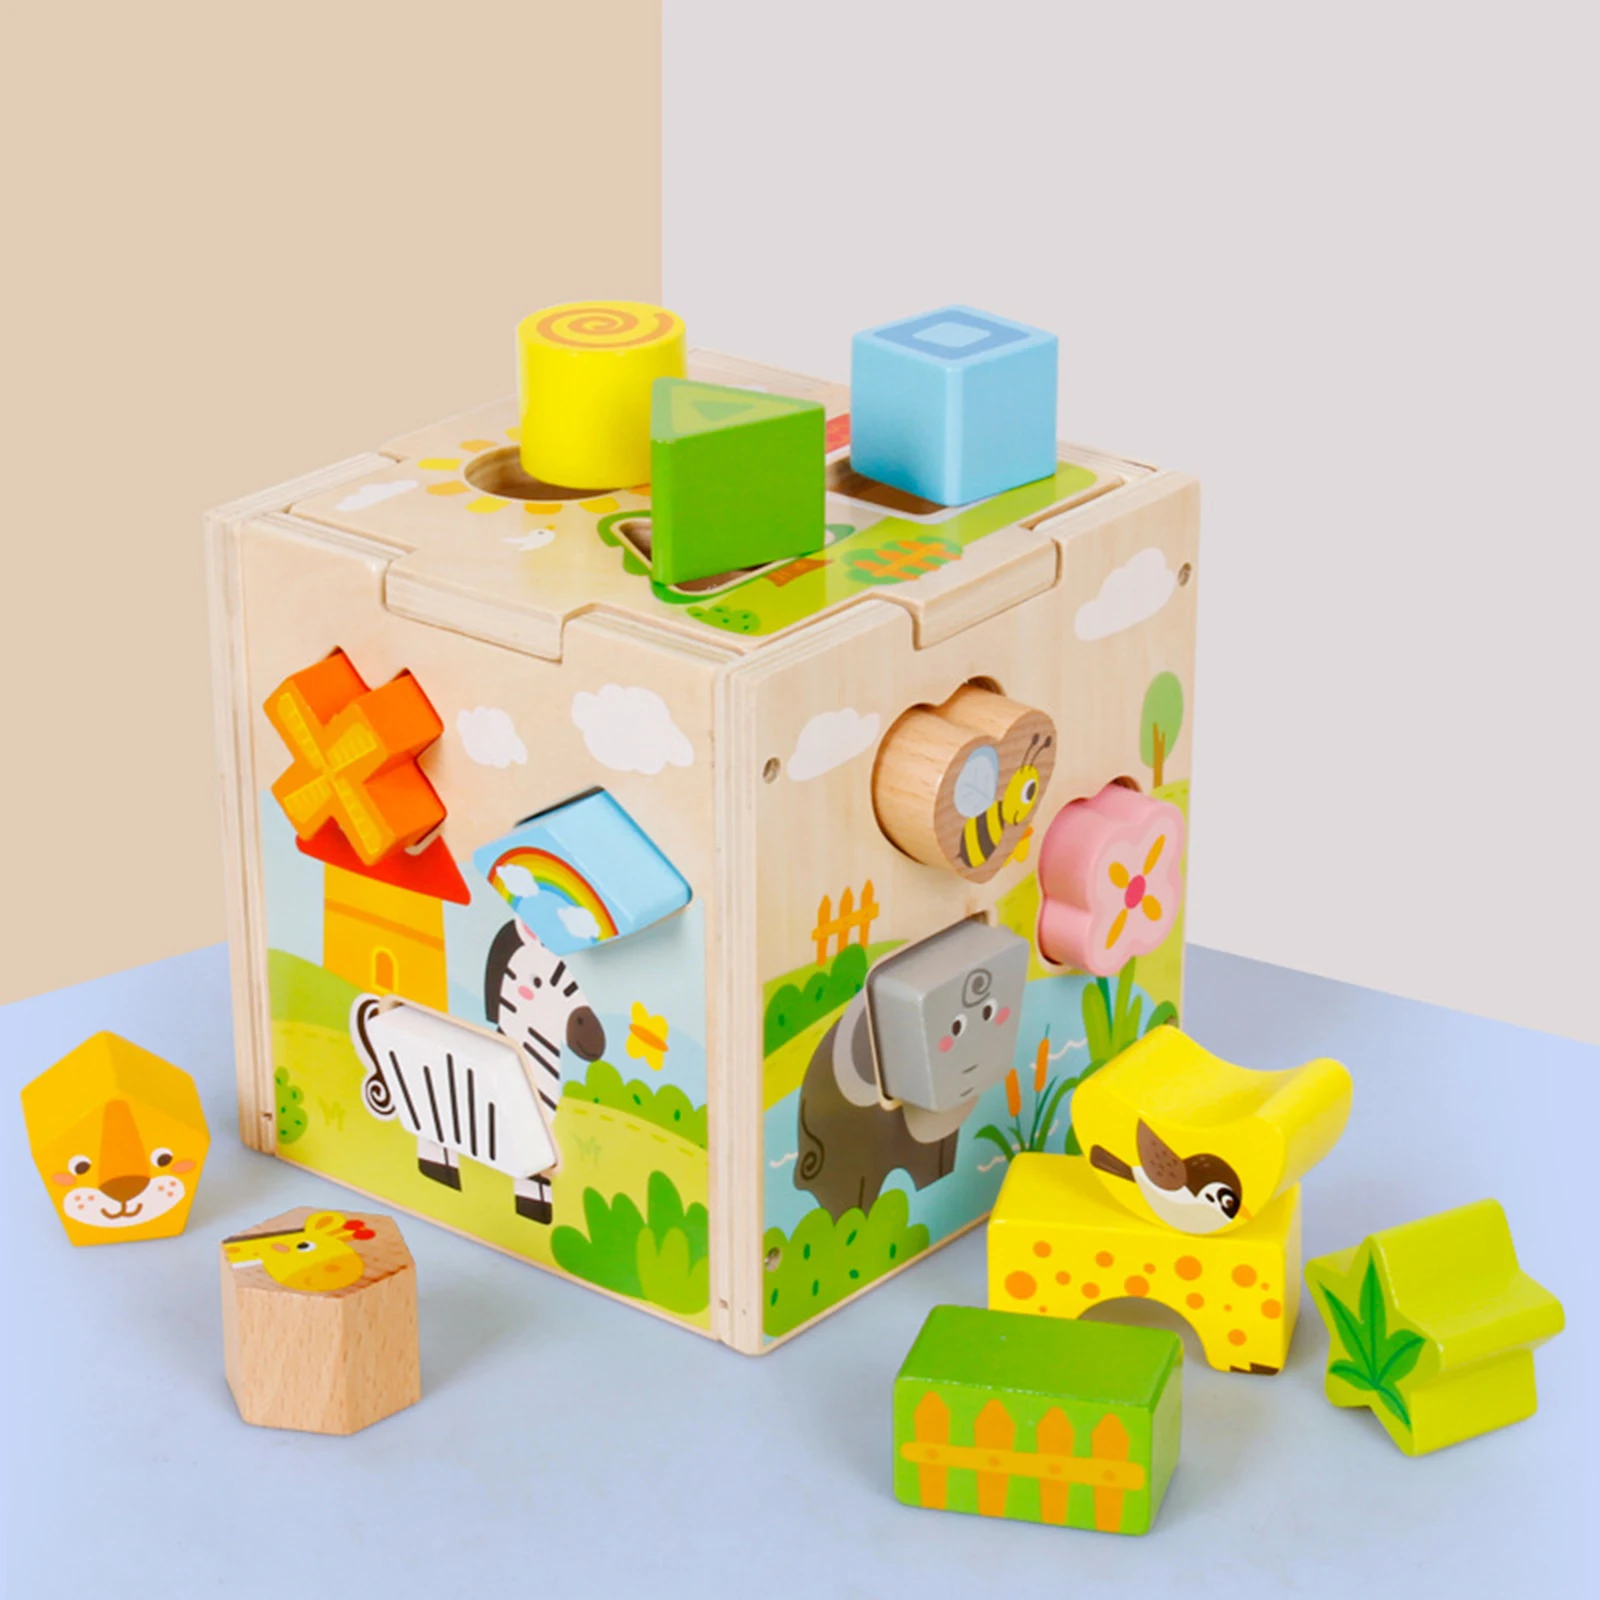 Wood Shape Sorter Toy Geometry Learning Developmental Colorful Toddlers Baby